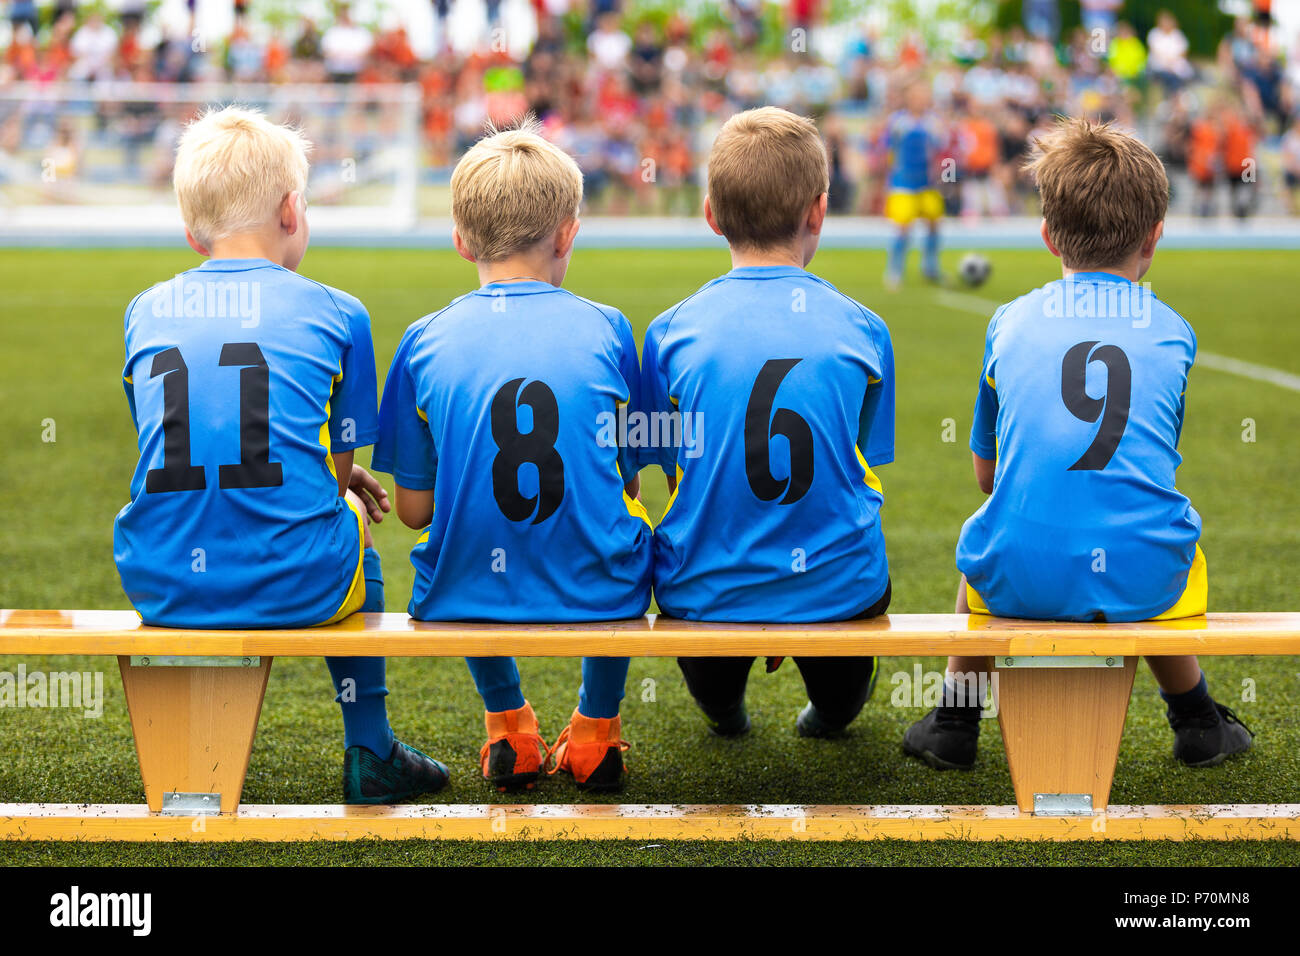 Football soccer tournament match for children. Kids substitute players sitting on a wooden bench. Football school competition for young boys Stock Photo